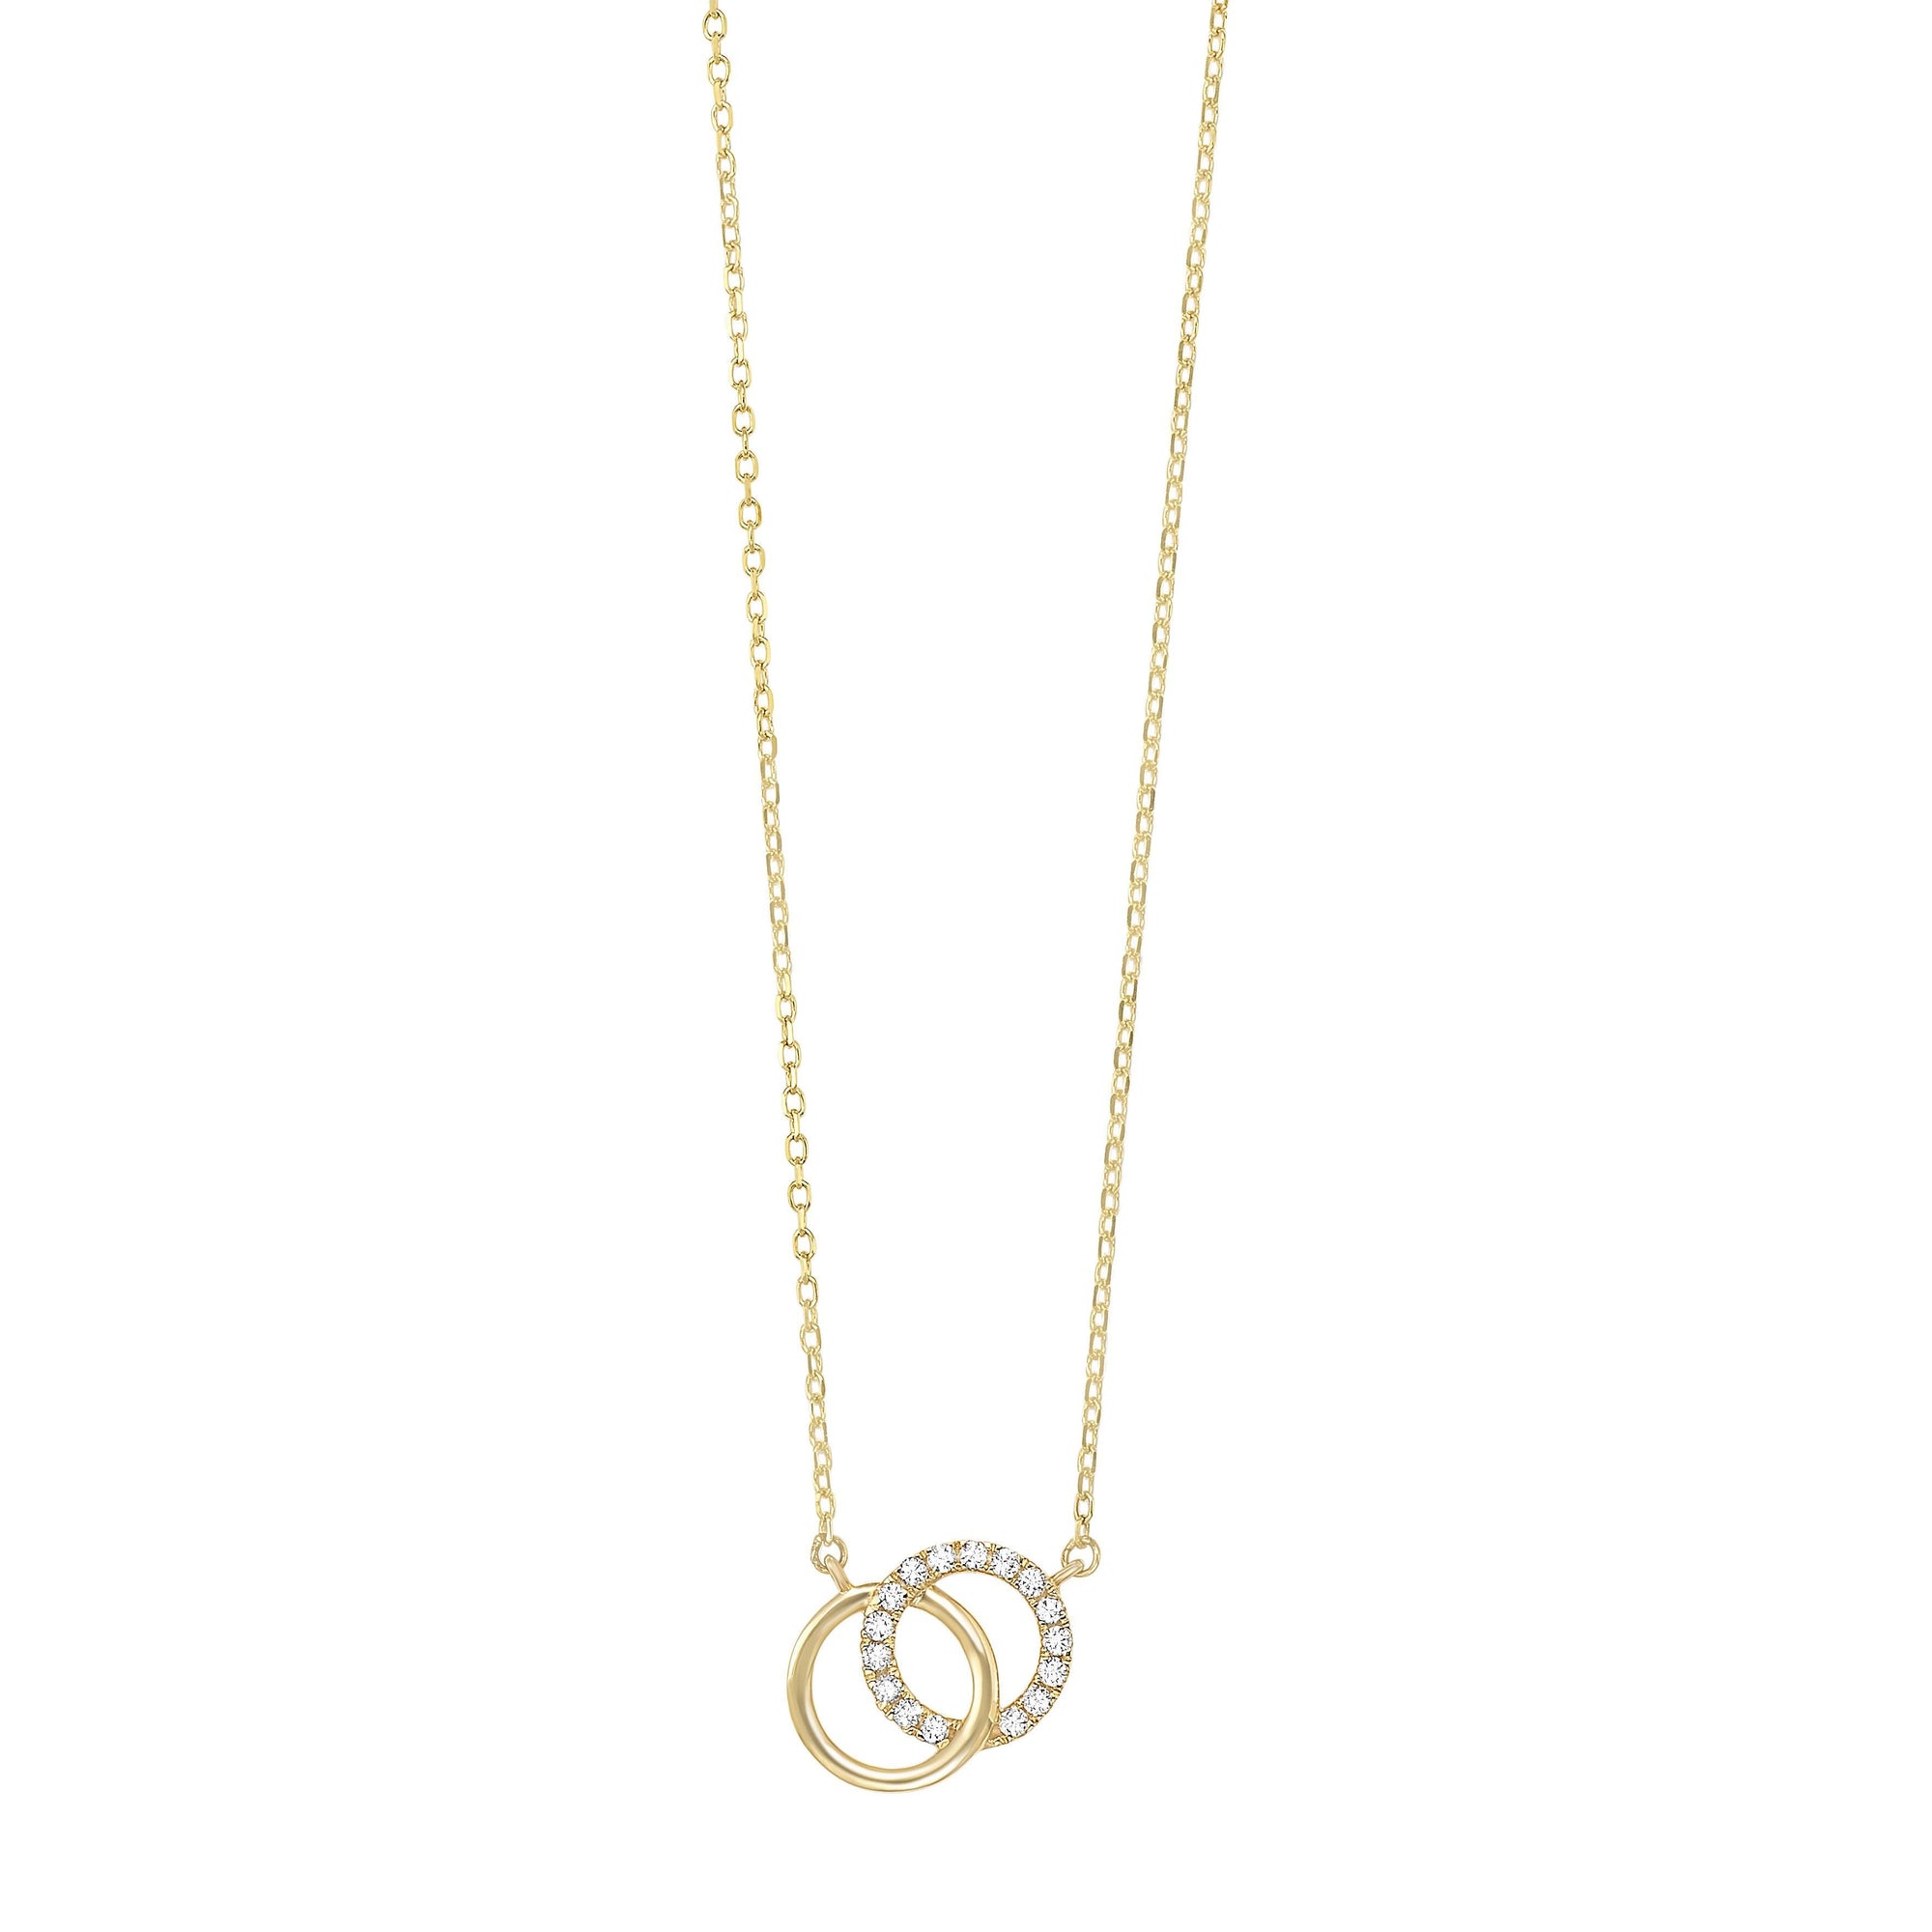 DOUBLE CIRCLE NECKLACE- 14k Yellow Gold - The Littl A$119.99 A$169.99 14k  Yellow Gold Chain Necklace Chokers